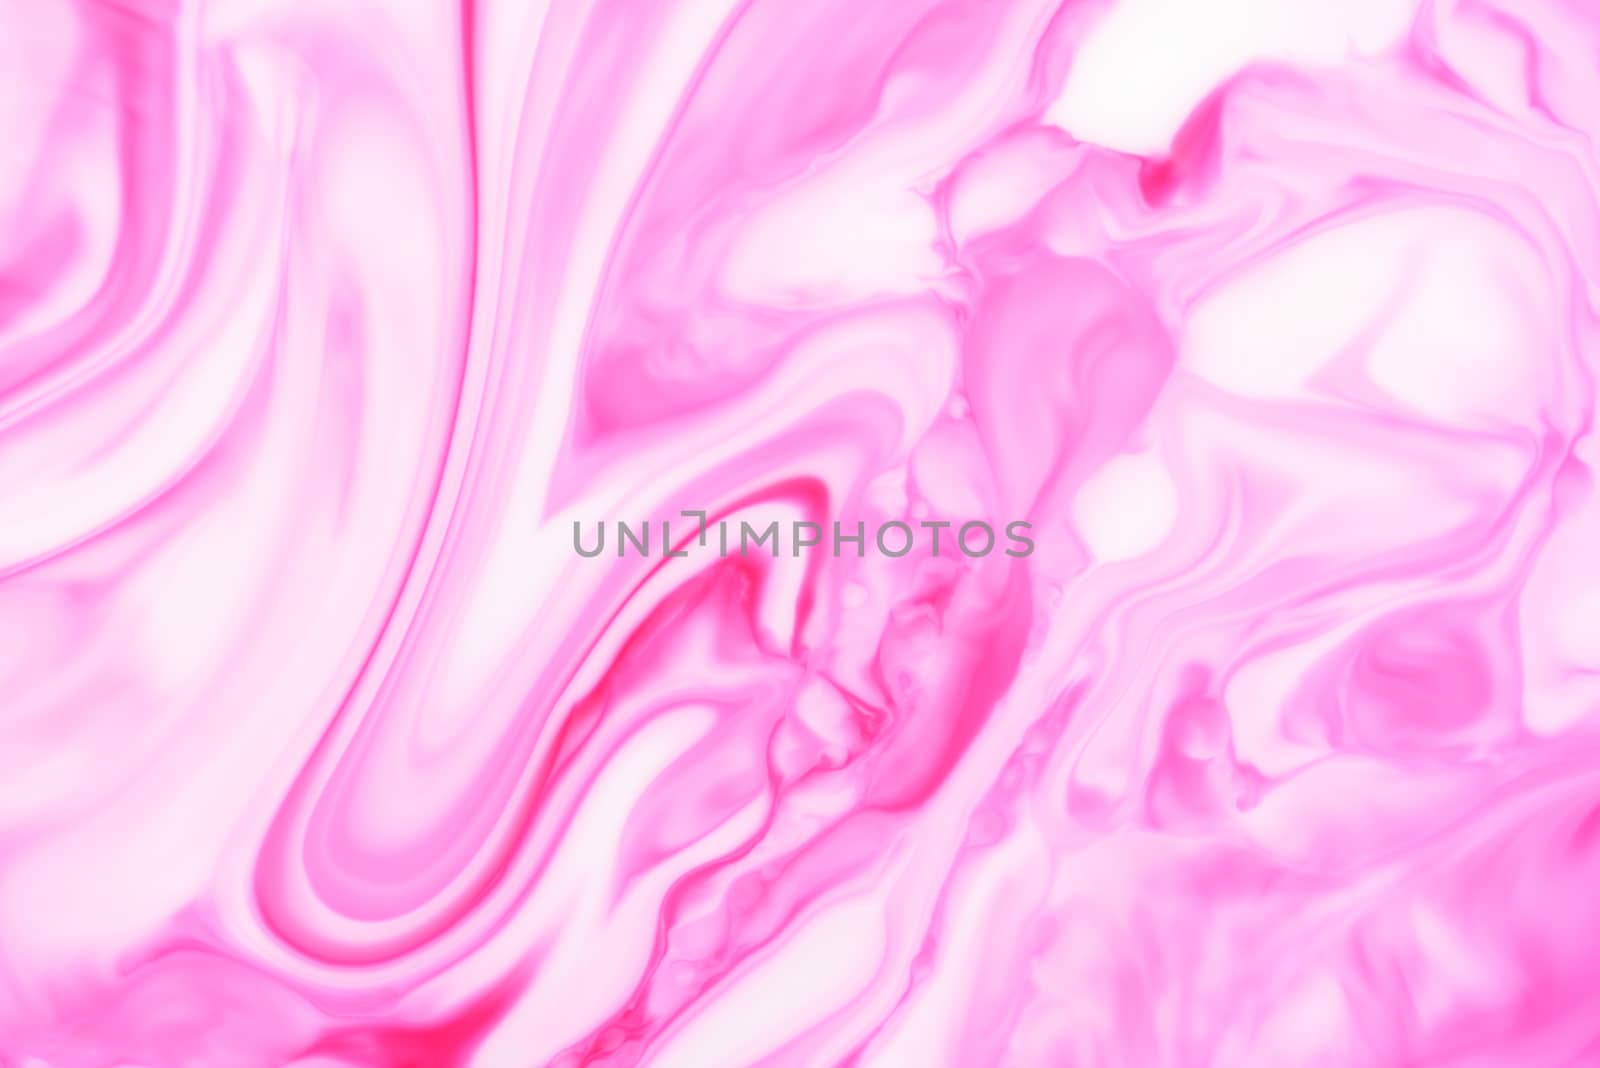 Abstract fluid pattern. Colorful painted background. Decorative marble texture.